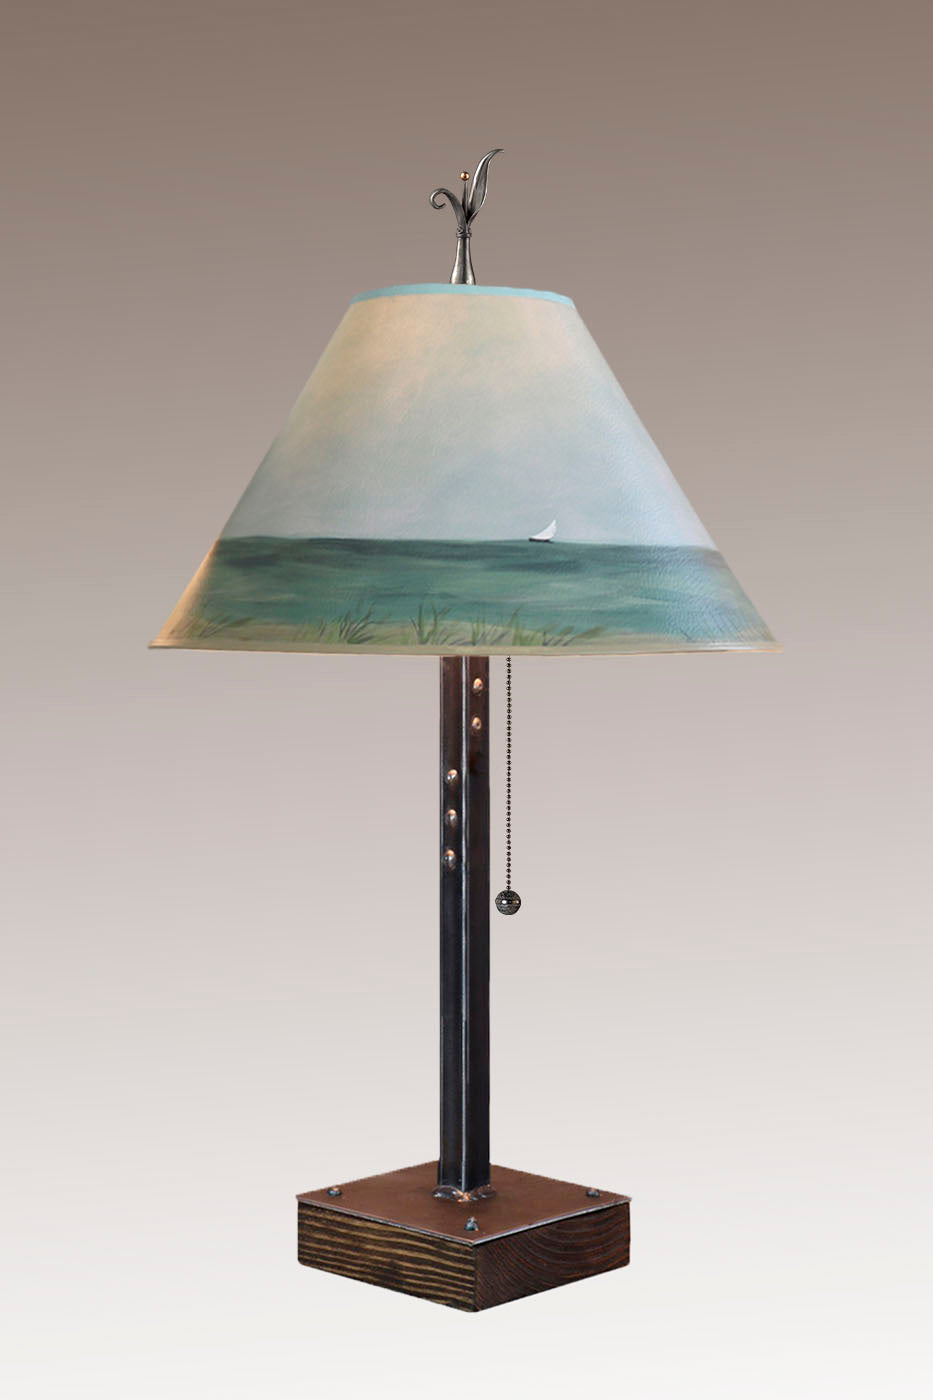 Steel Table Lamp on Wood with Medium Conical Shade in Shore